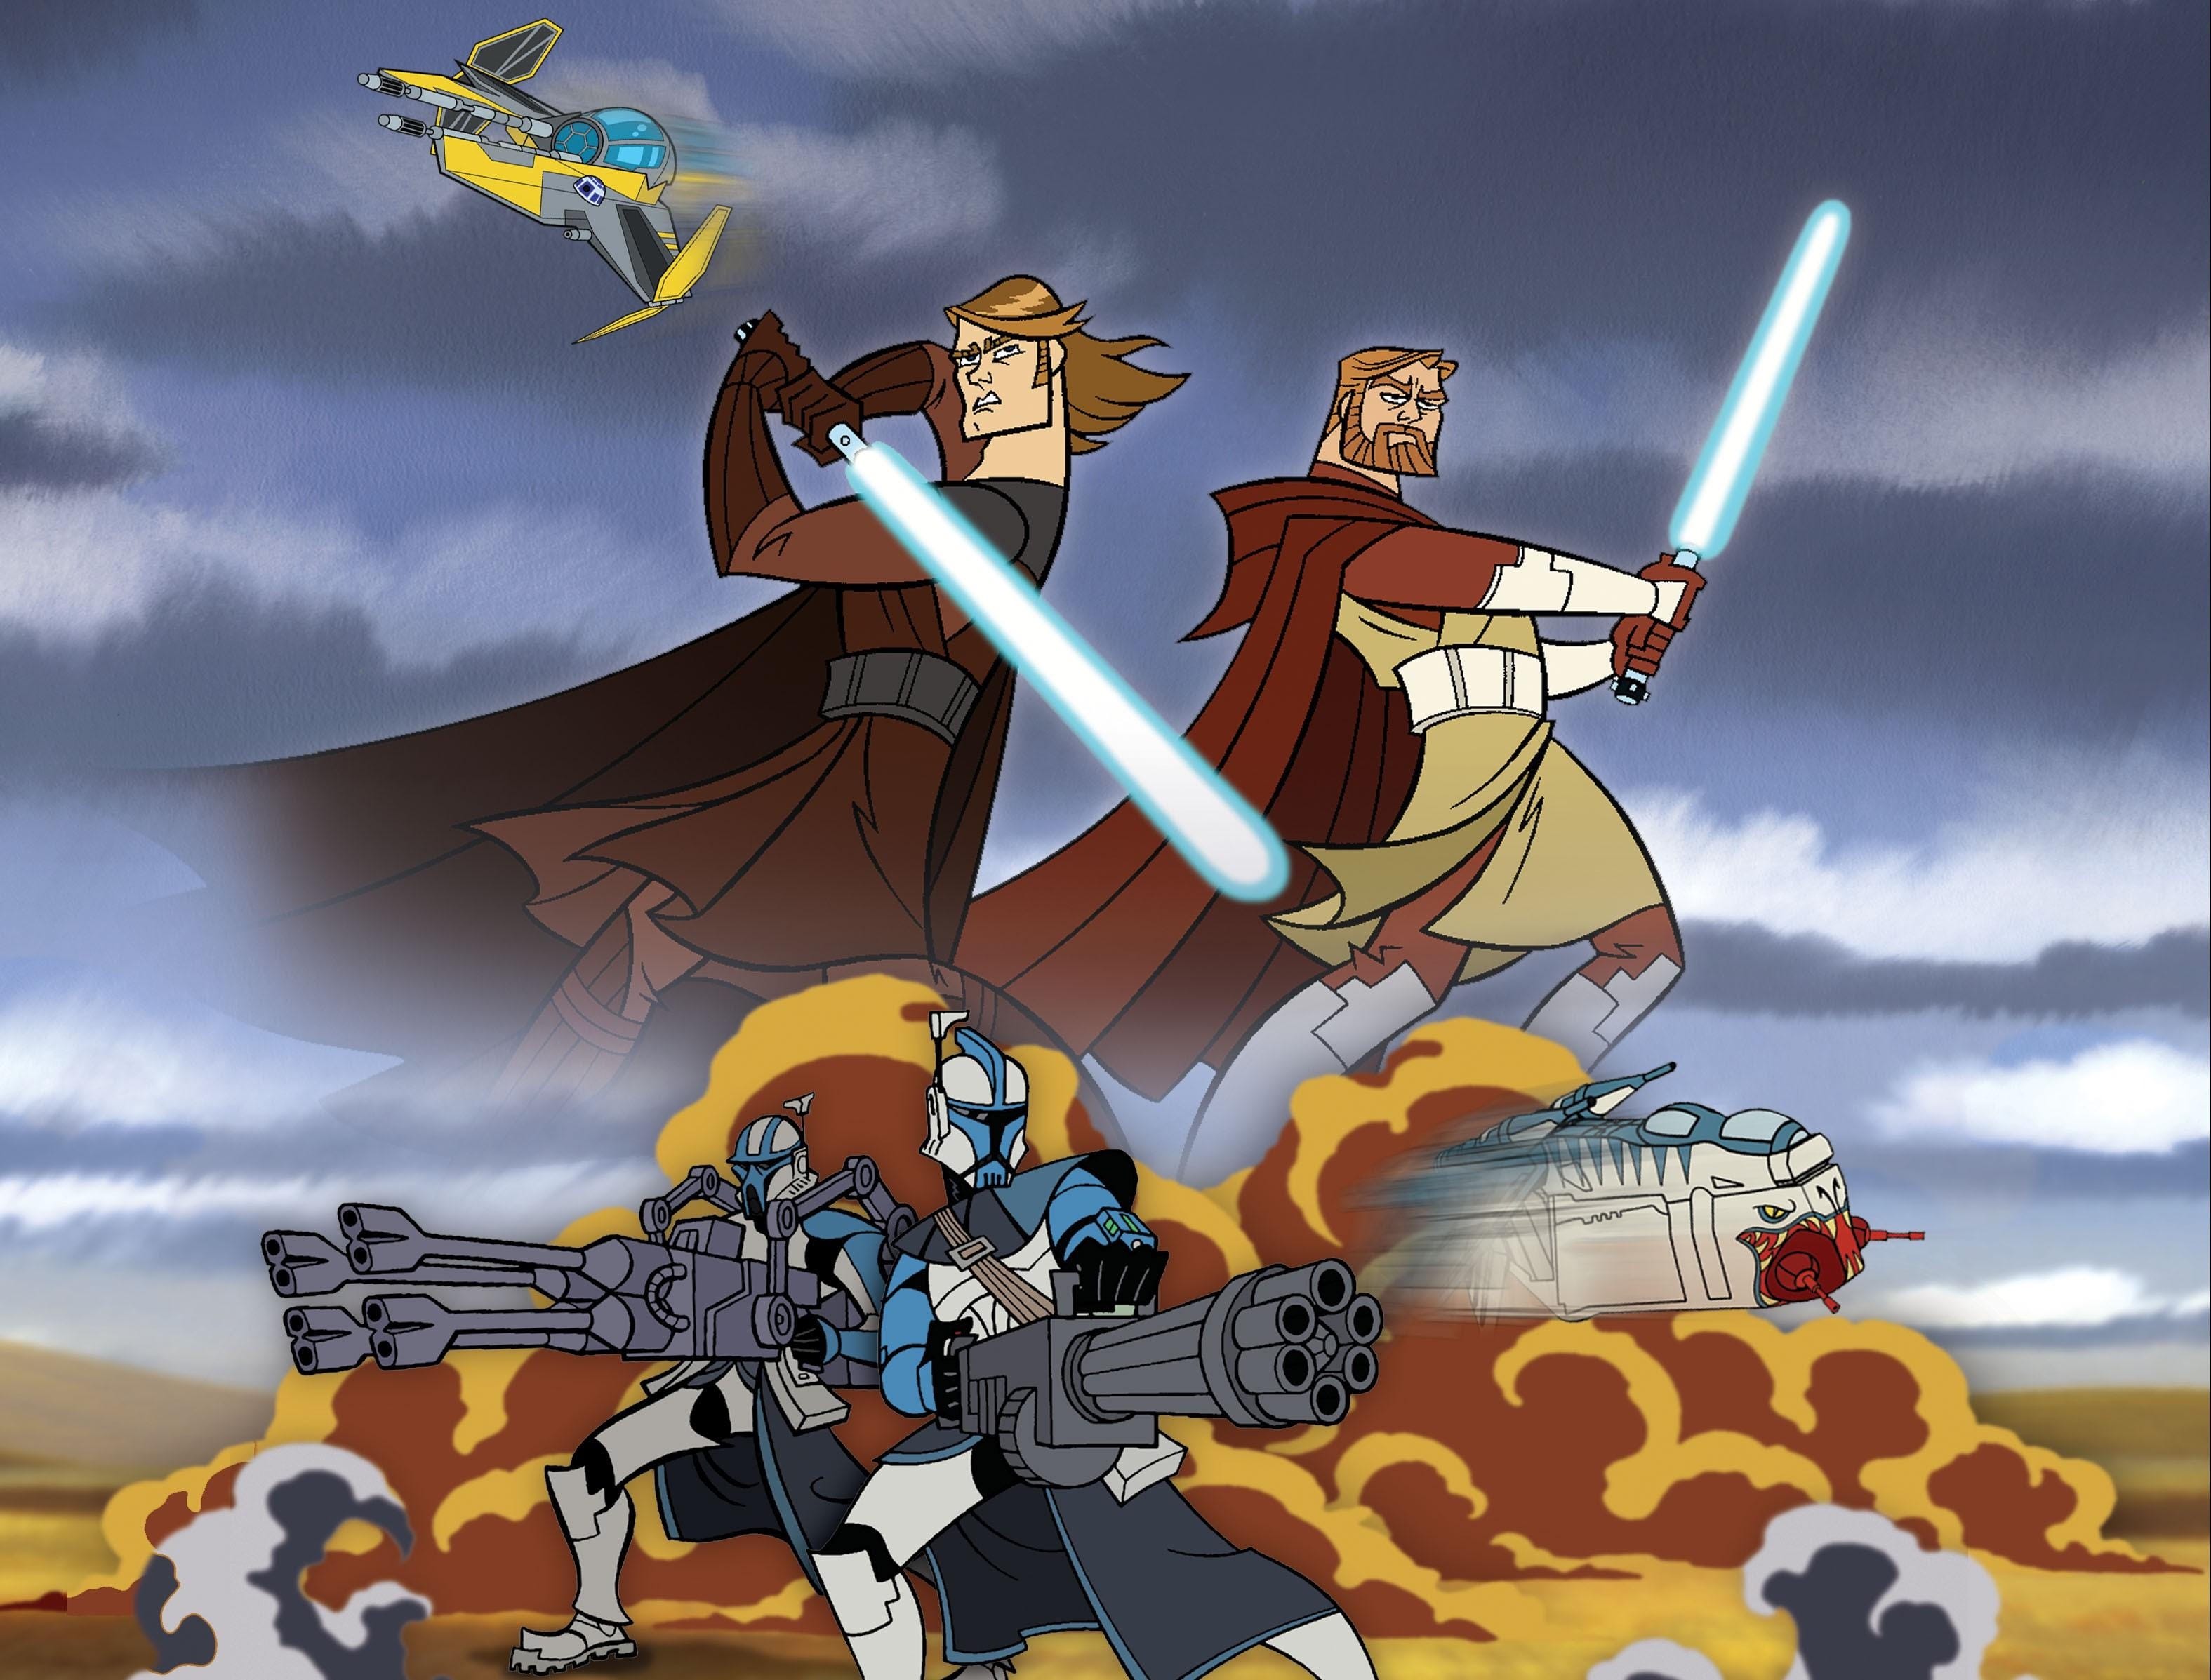 Star Wars: The Bad Batch' and the best 'Star Wars' animated TV series